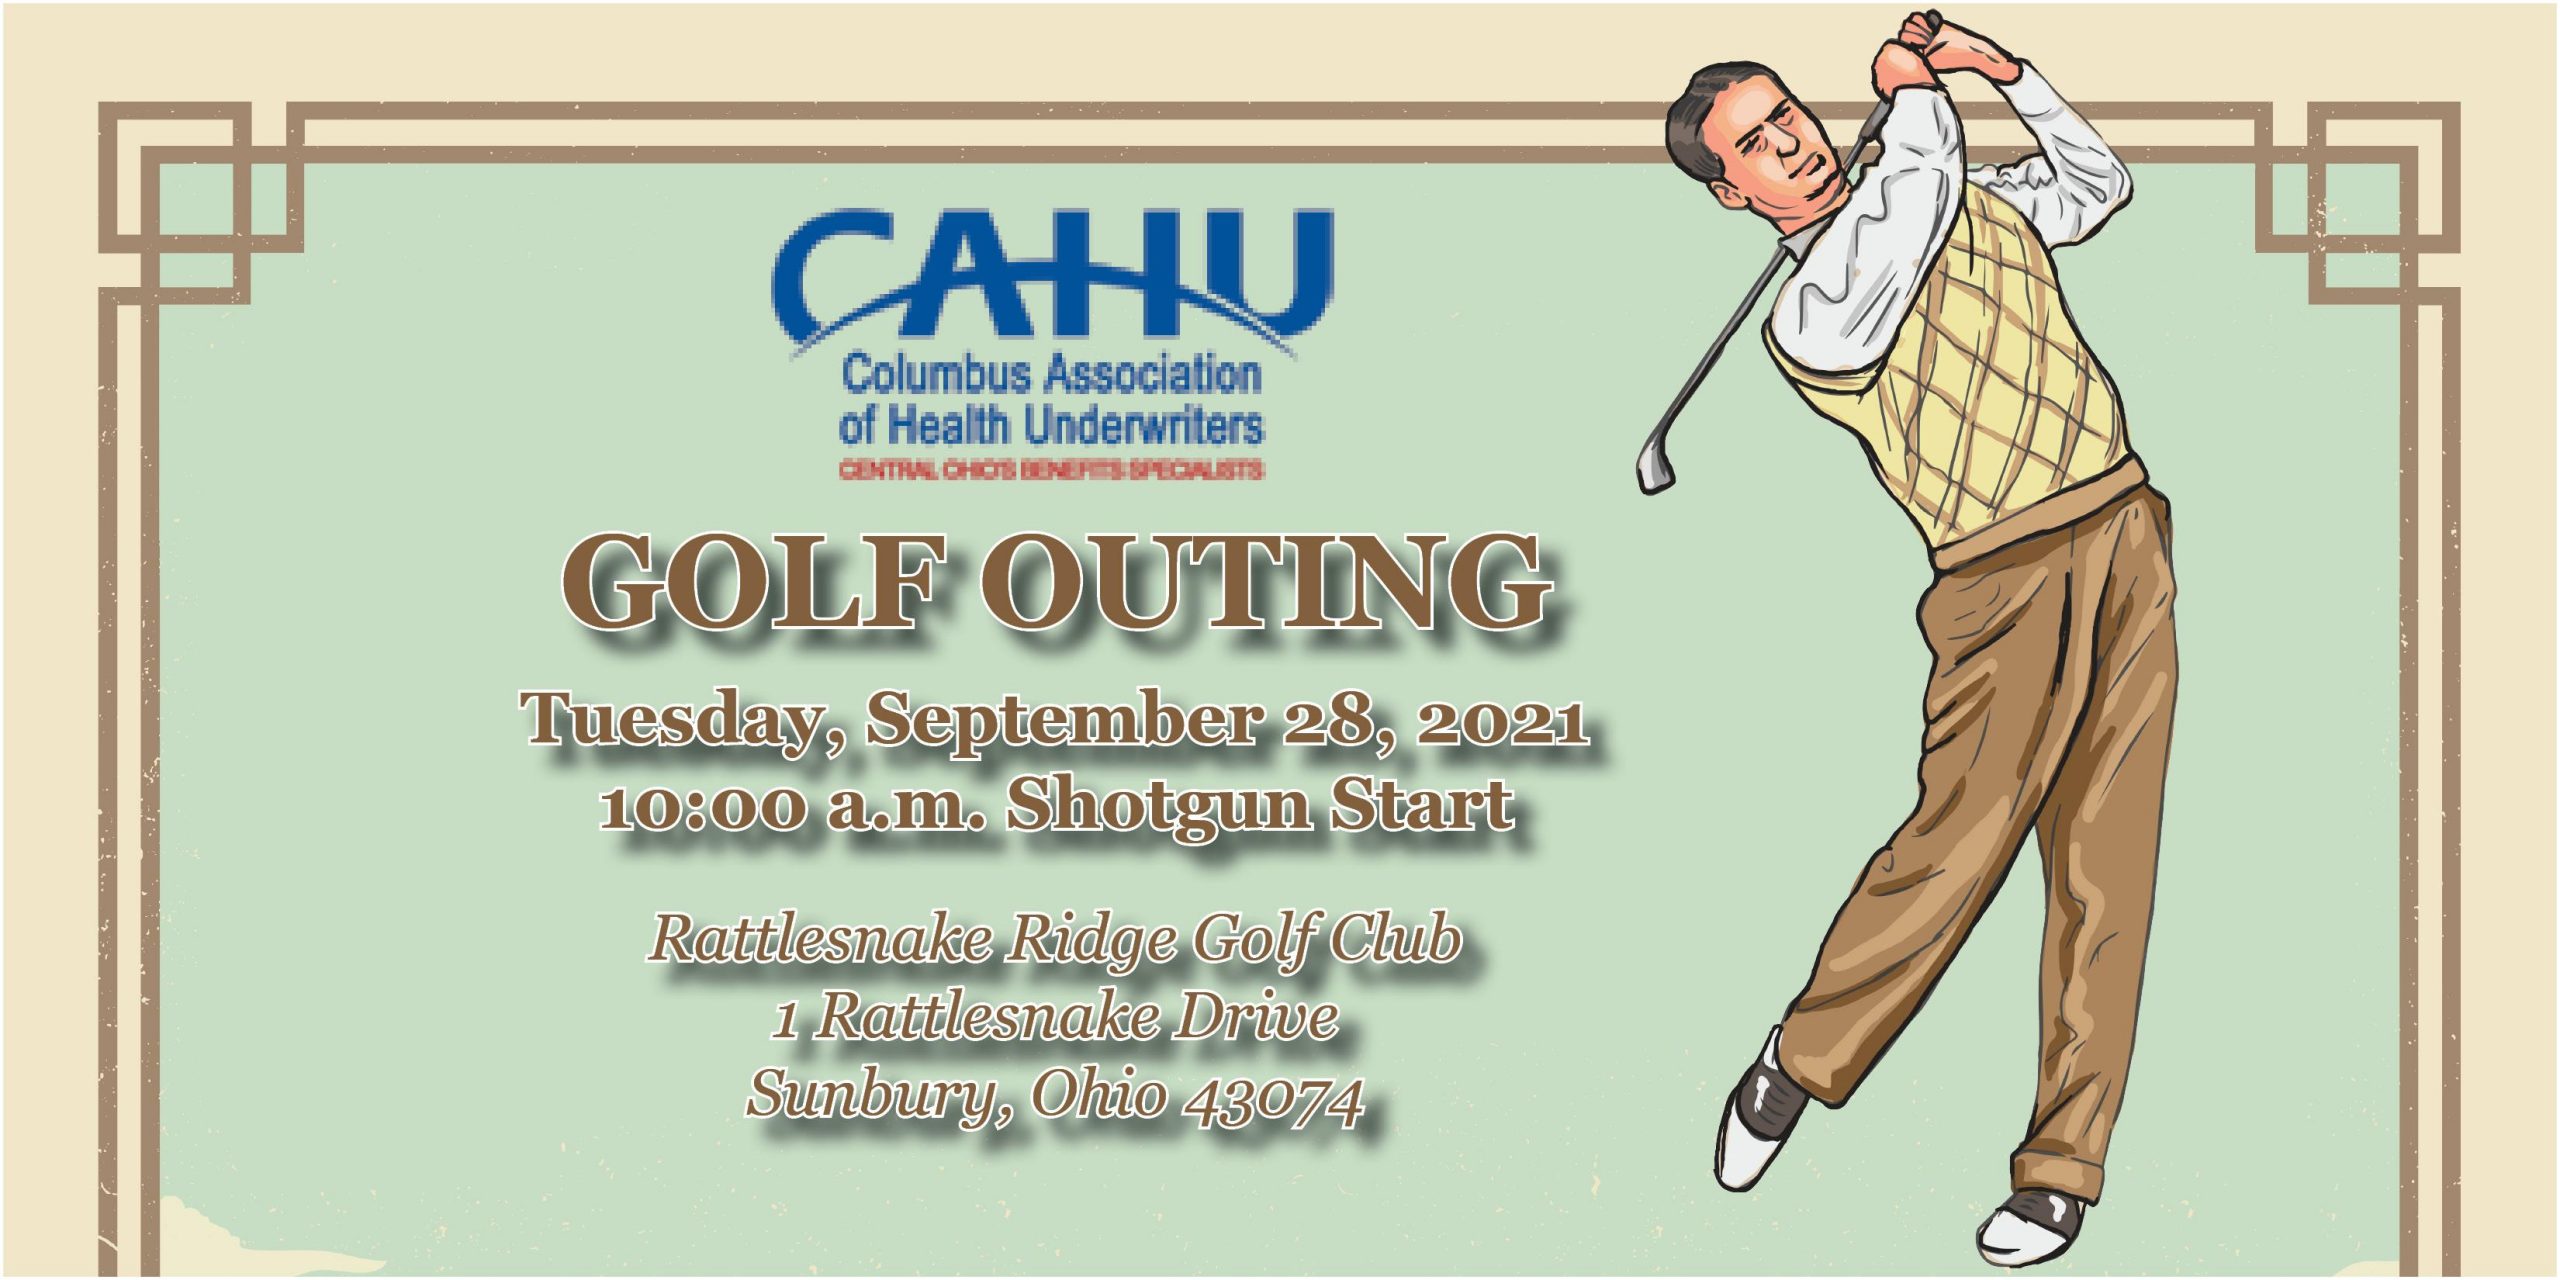 CAHU Golf Outing